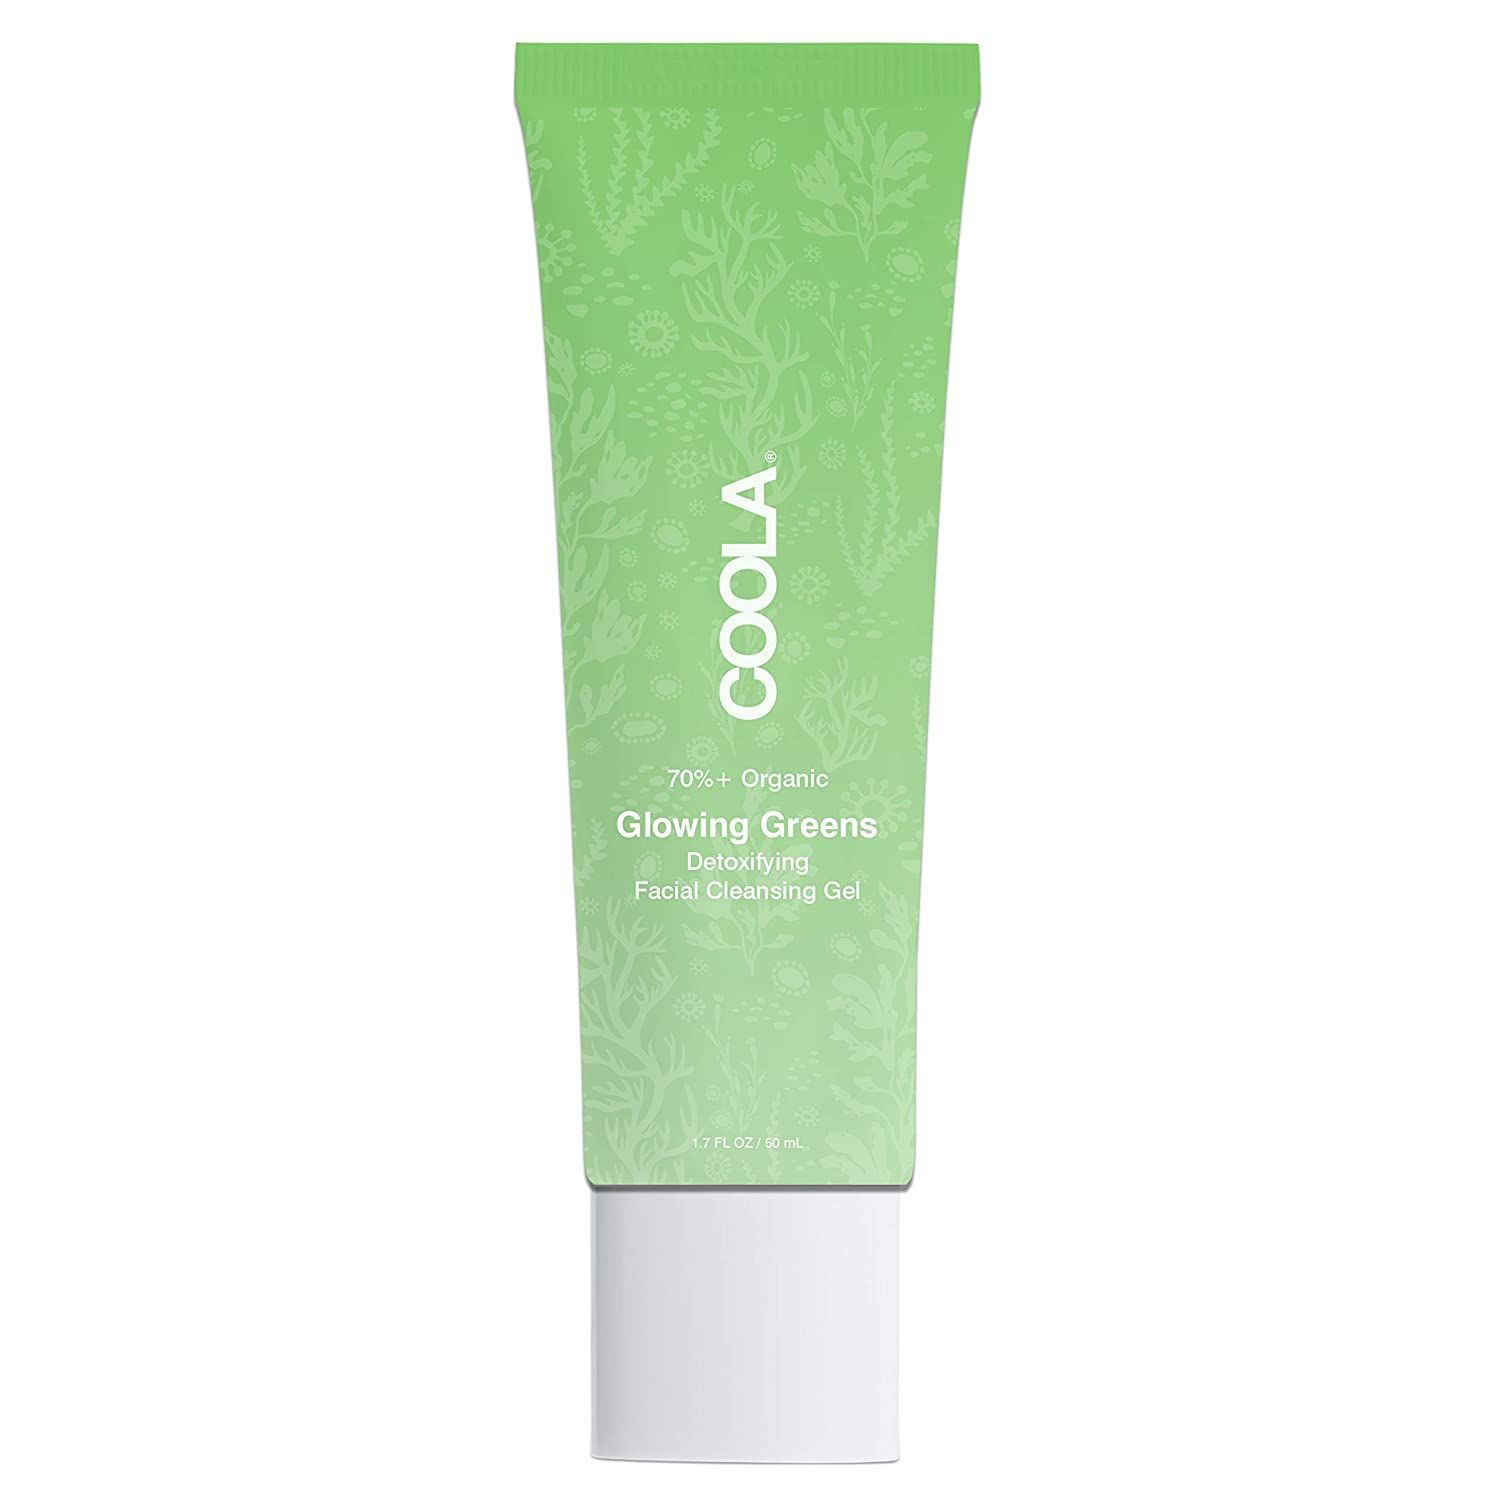 COOLA Organic Glowing Greens Facial Cleanser, Travel Size - 1.7 fl oz